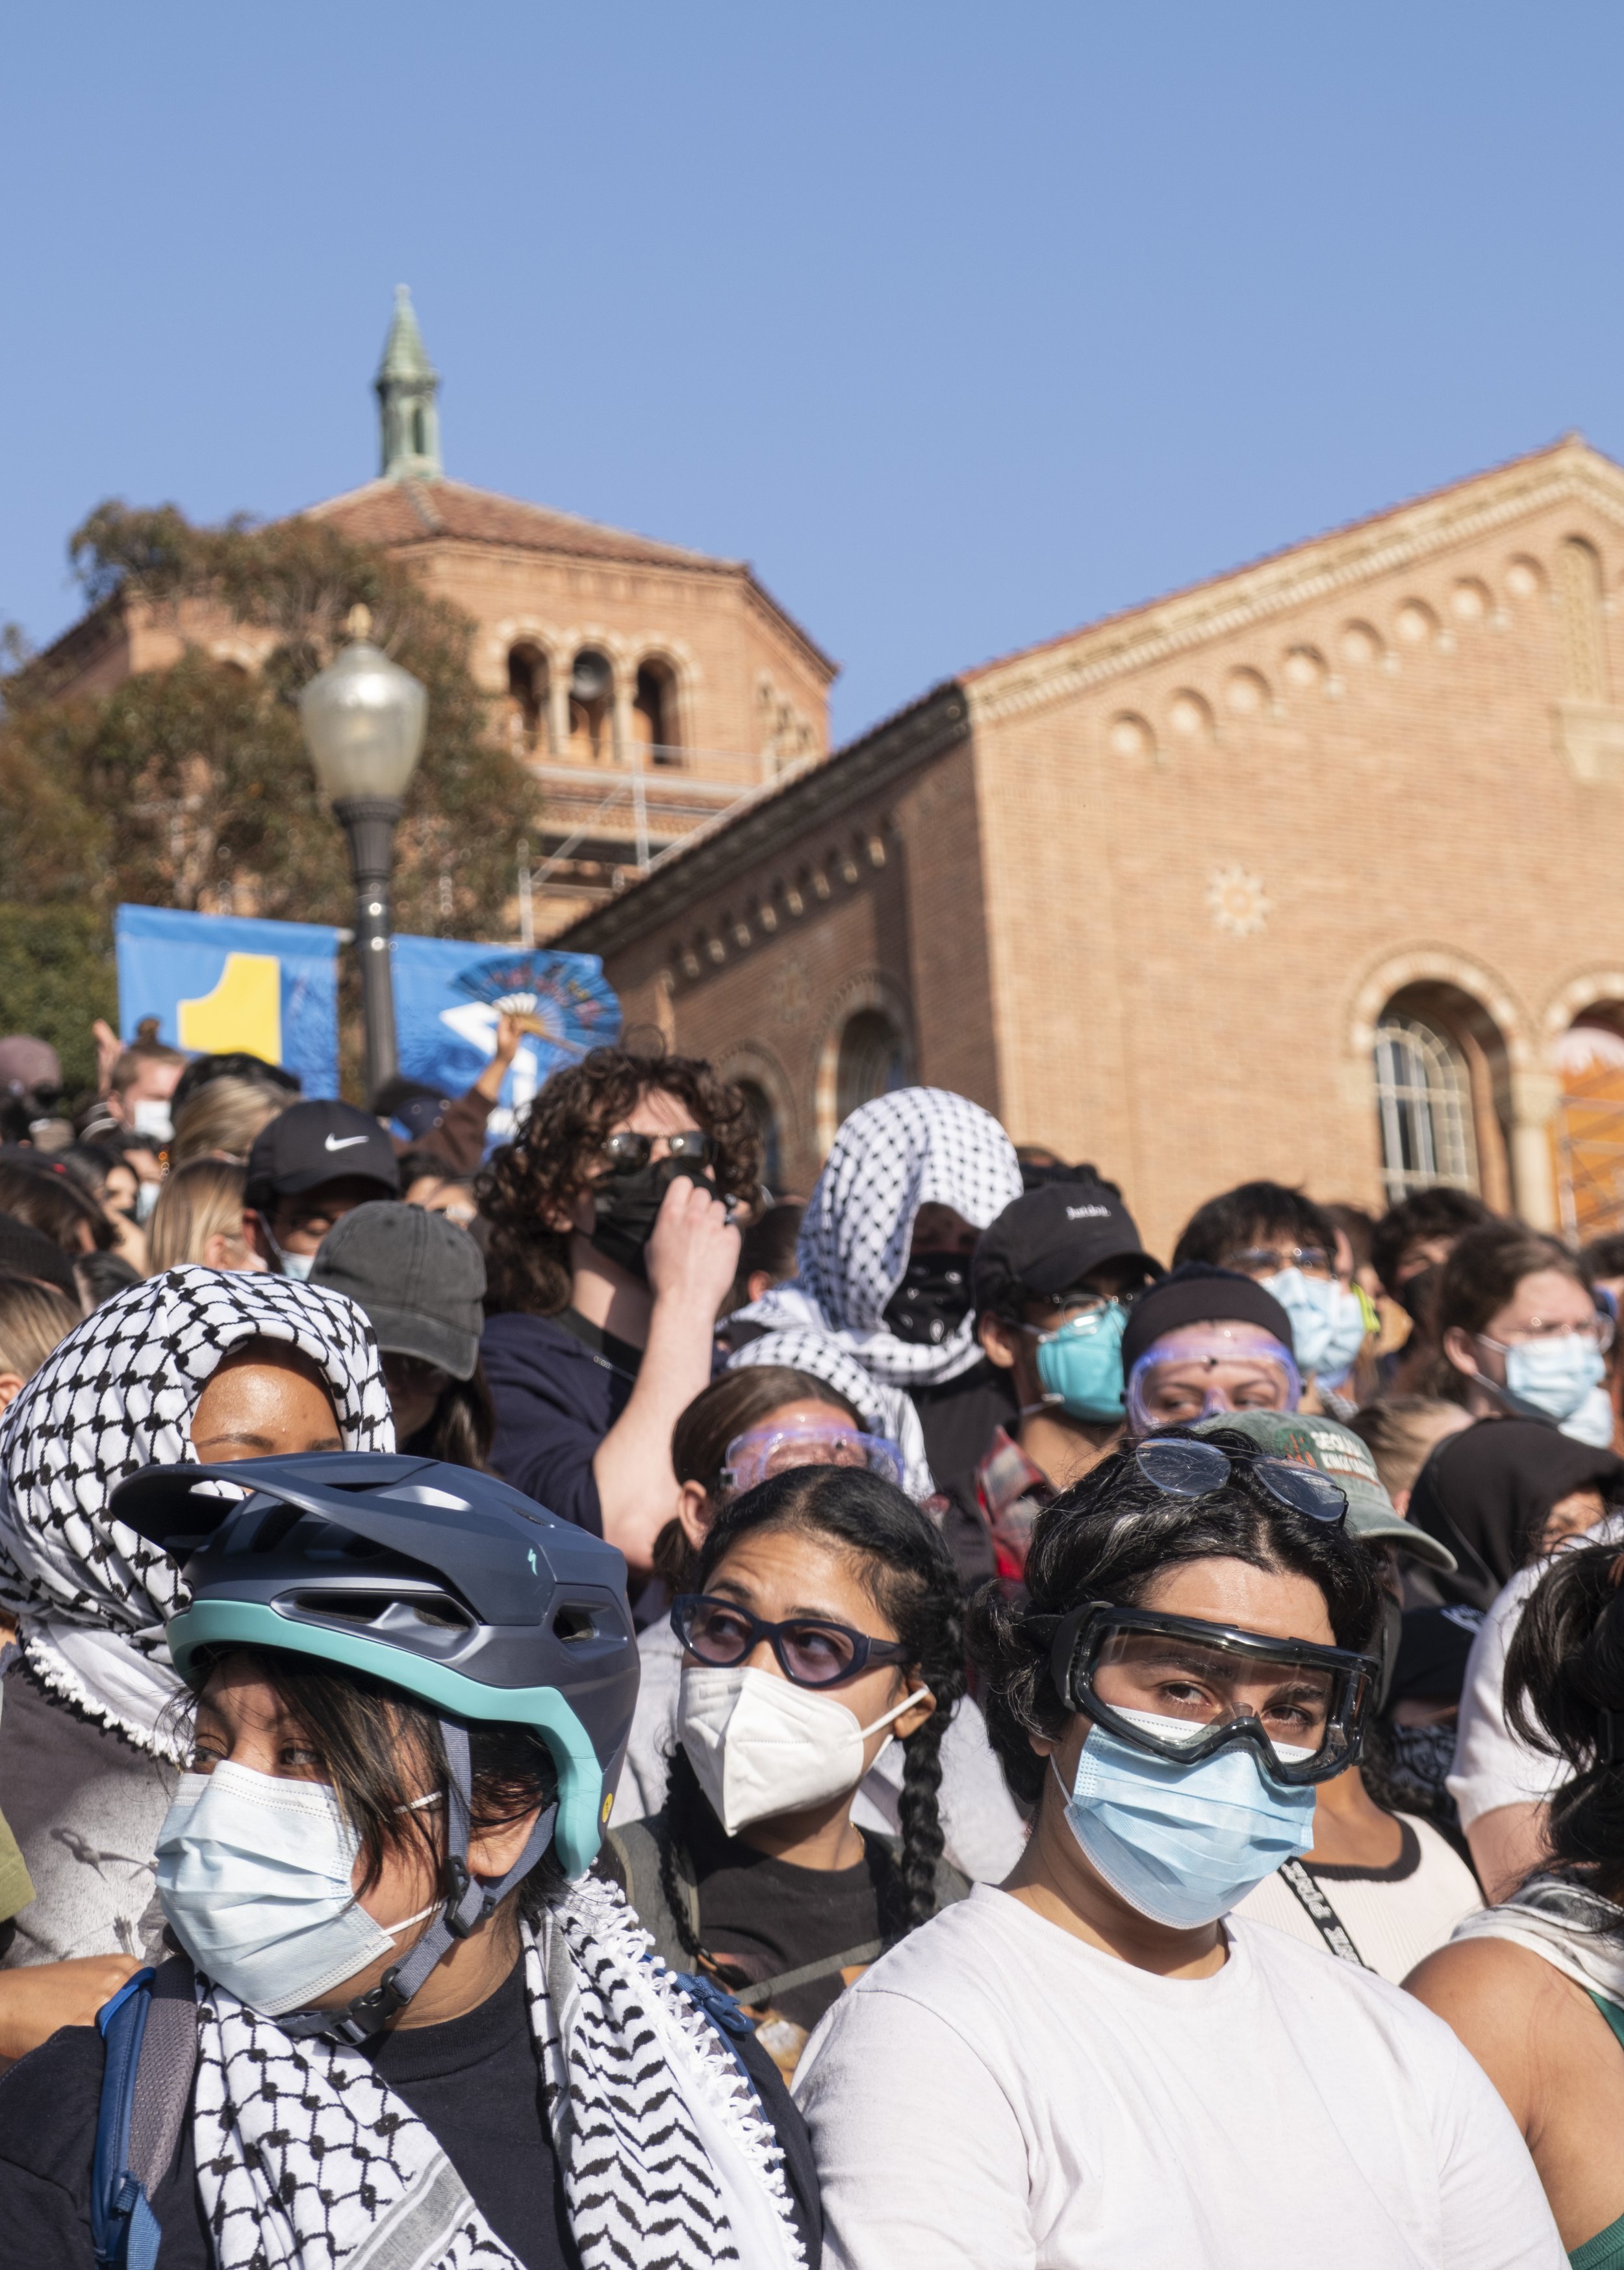  Pro-Palastinian supporters wear goggles and mask in preperation of tear gas as they stand together to defend the University of California, Los Angeles(UCLA) encampment on Wednesday, May 1 at Los Angeles, Calif. Dozens of protesters came out to Dicks